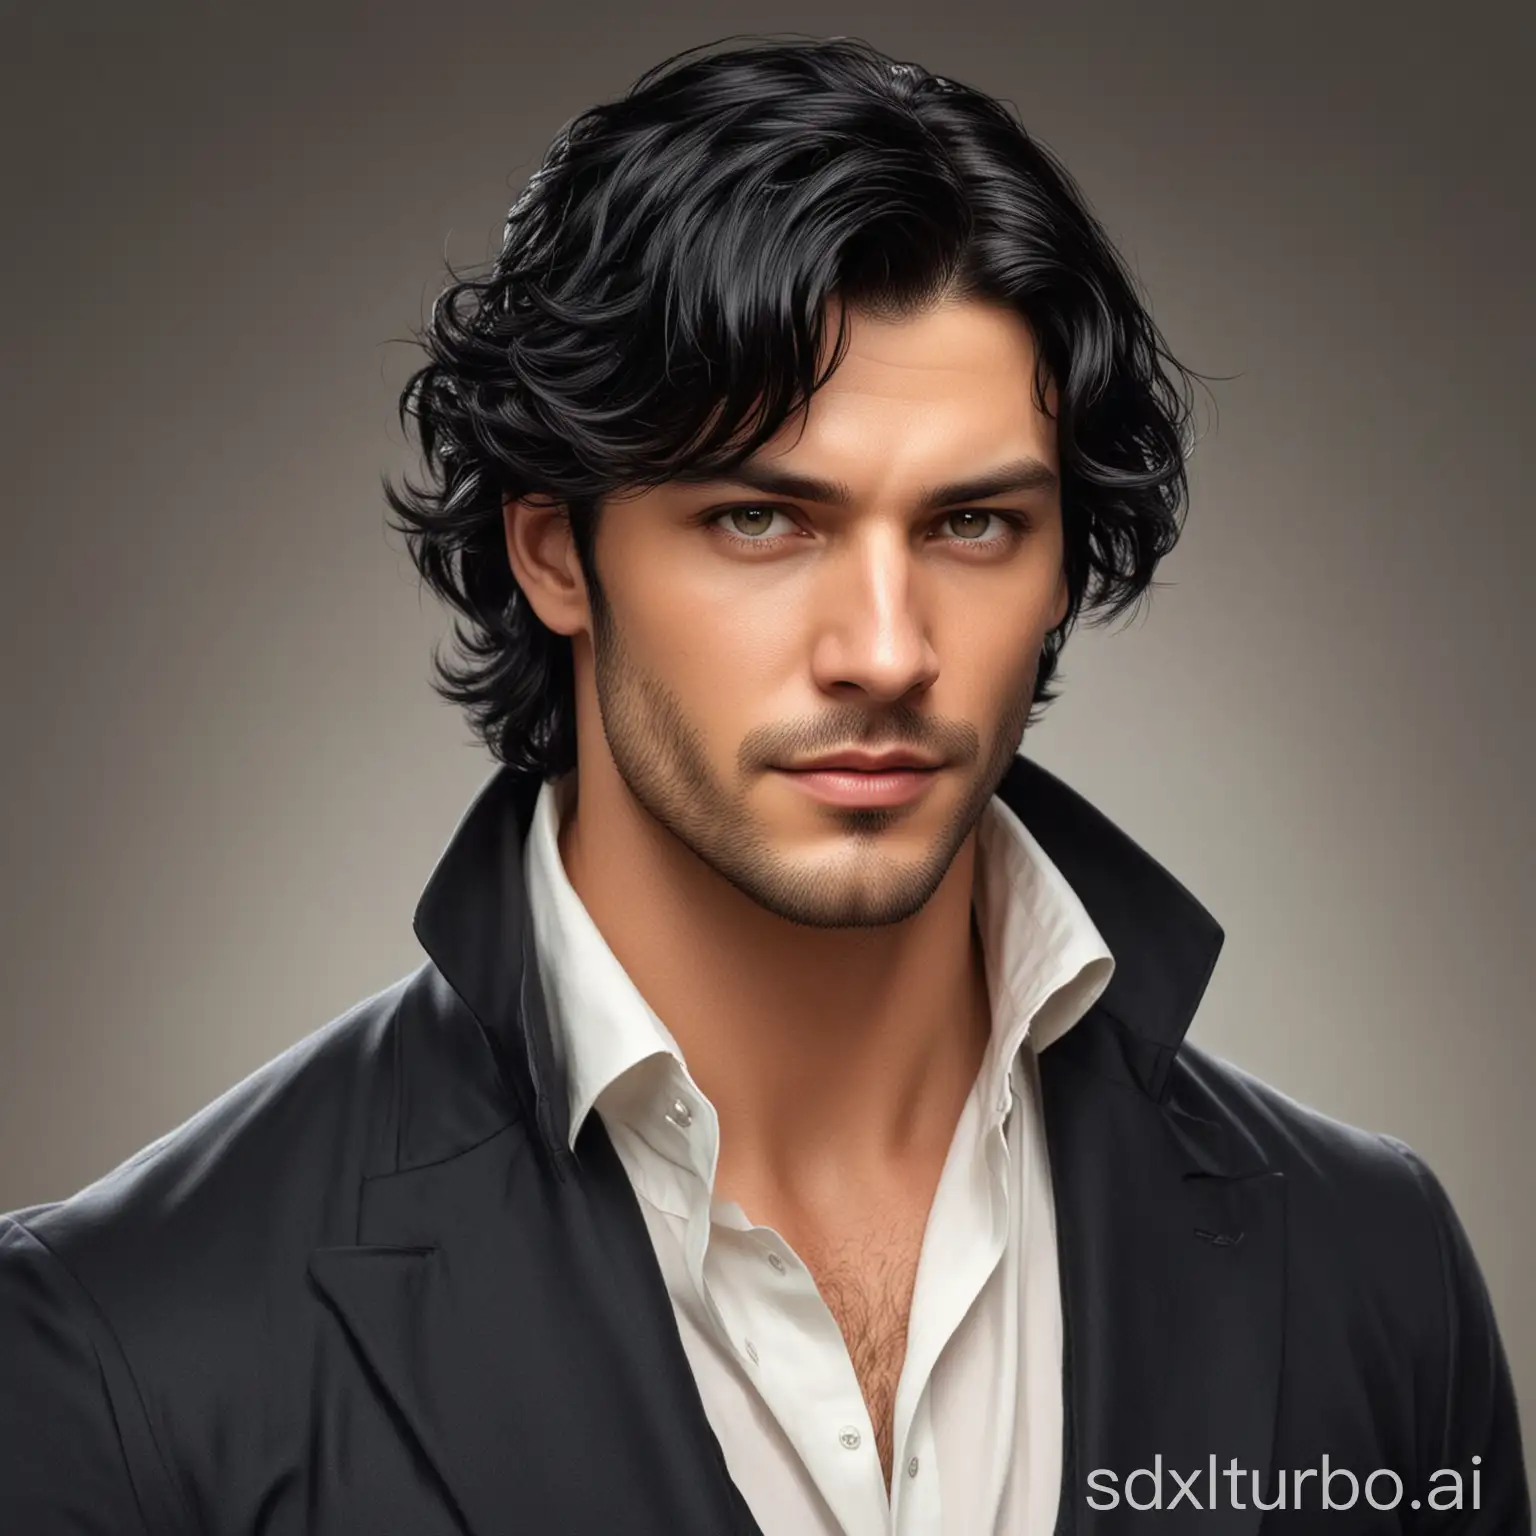 Male, black hair, wavy hair, early thirties, toned, attractive, handsome, manly, book character art